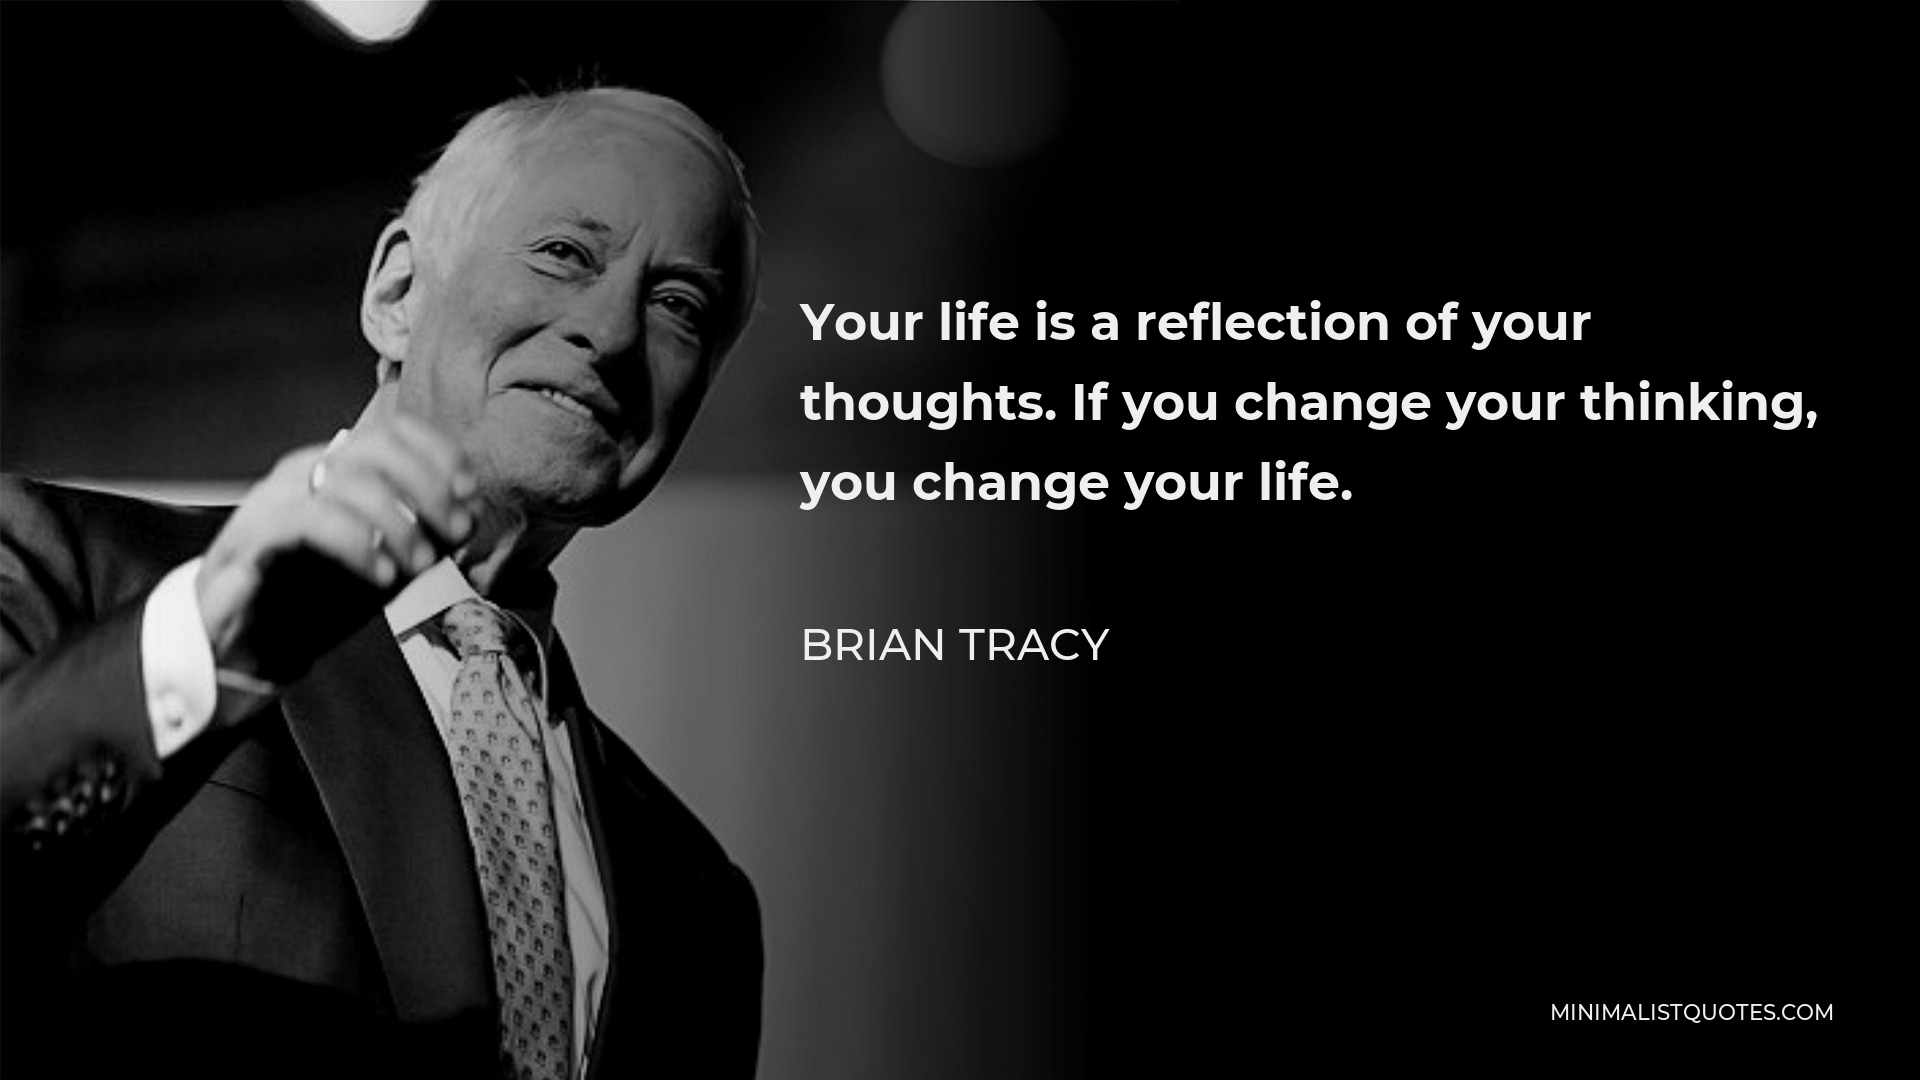 Brian Tracy Quote - Your life is a reflection of your thoughts. If you change your thinking, you change your life.